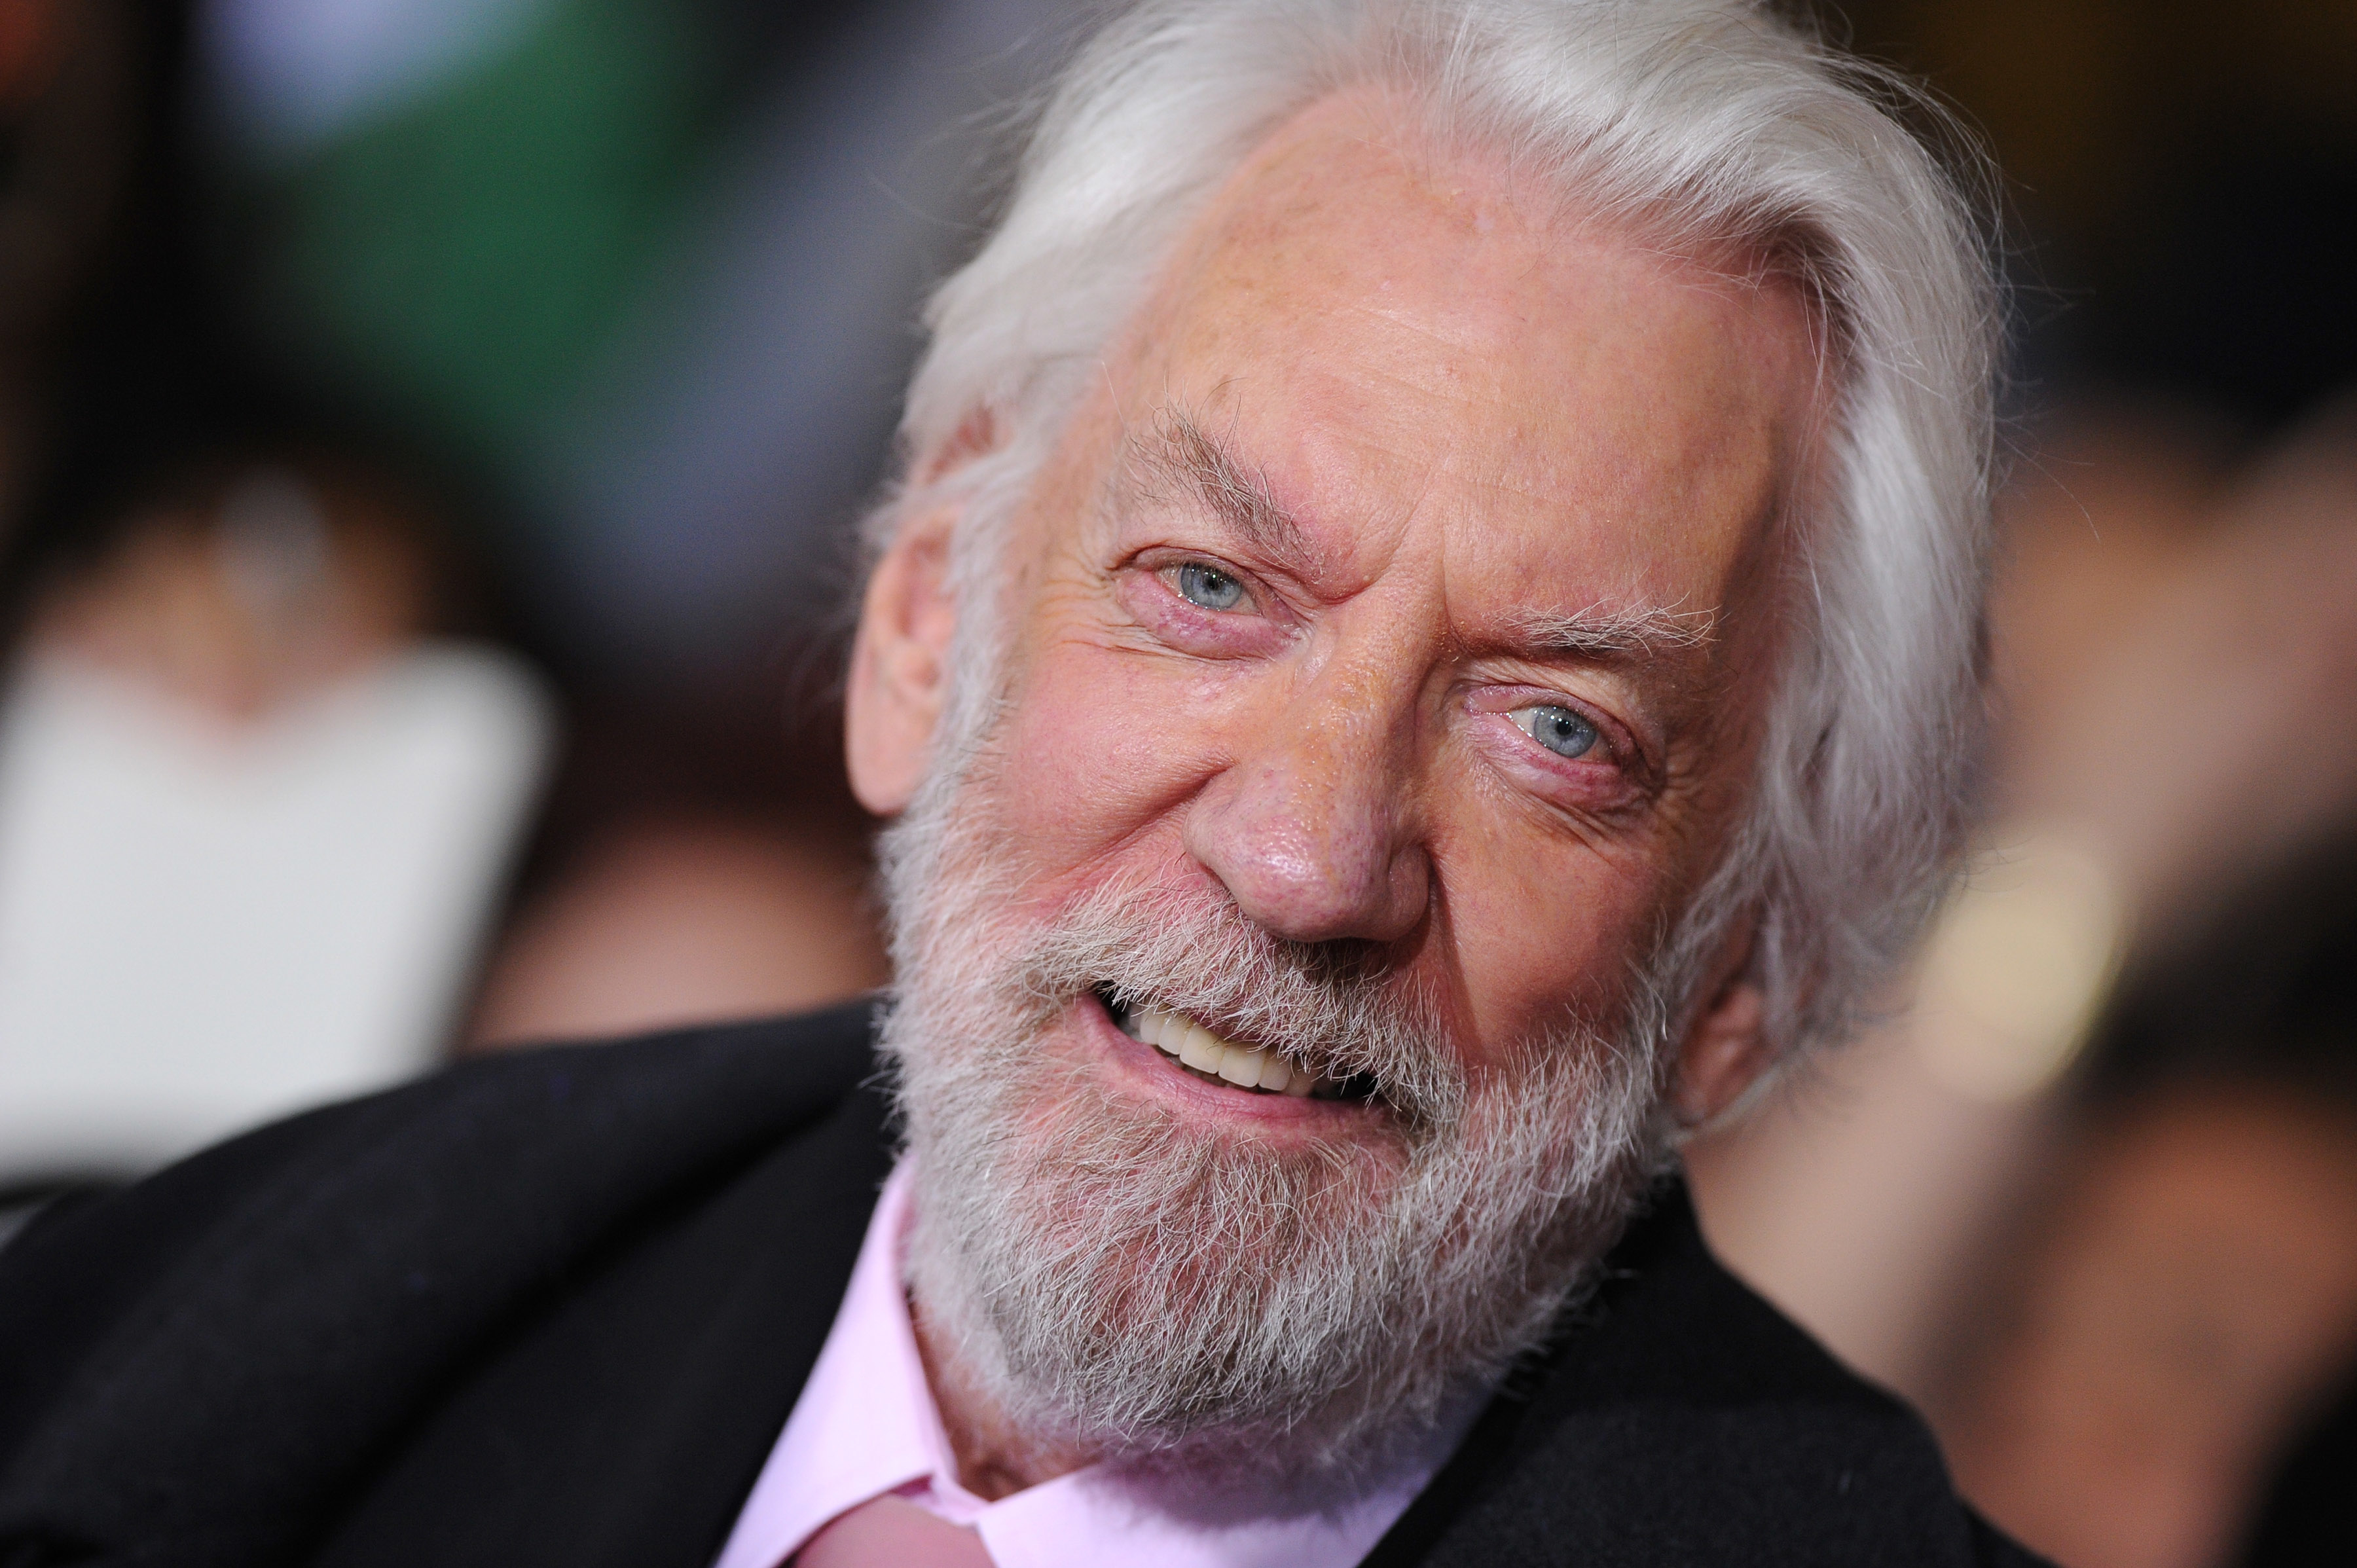 Donald Sutherland smiling while wearing a suit with a light-colored shirt, seen at a public event